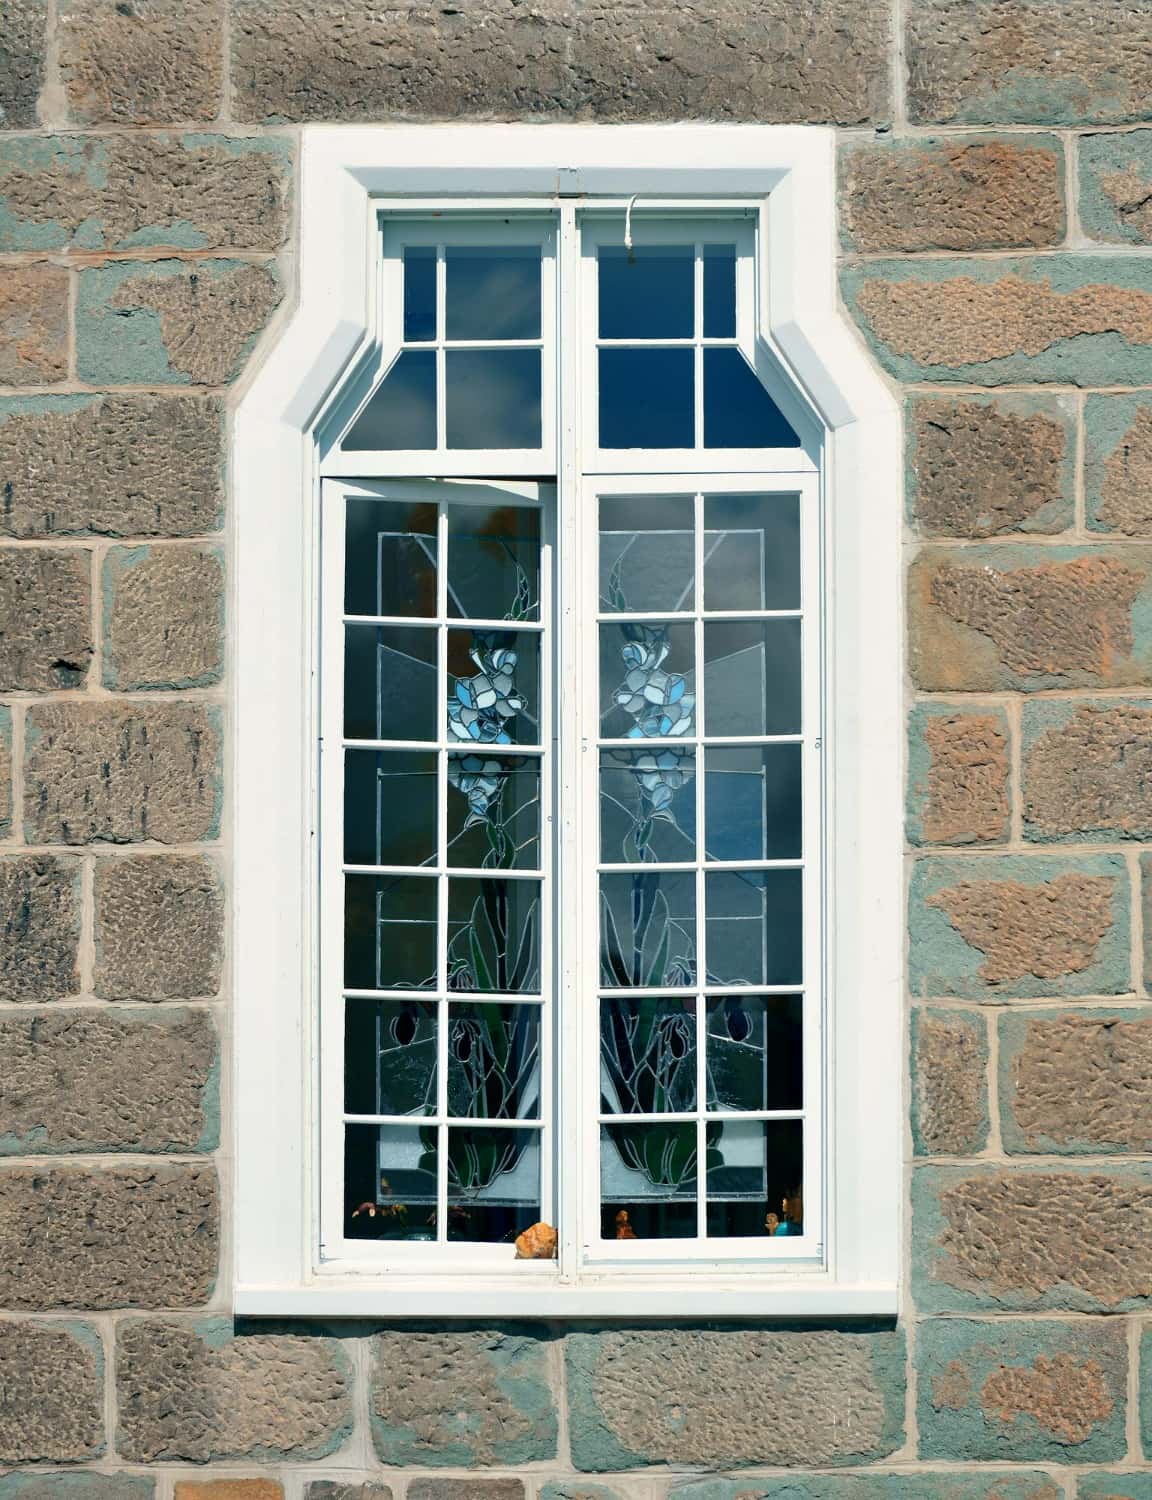 Are You Looking for Latest Windows Designs for Your Home? Here Are ...